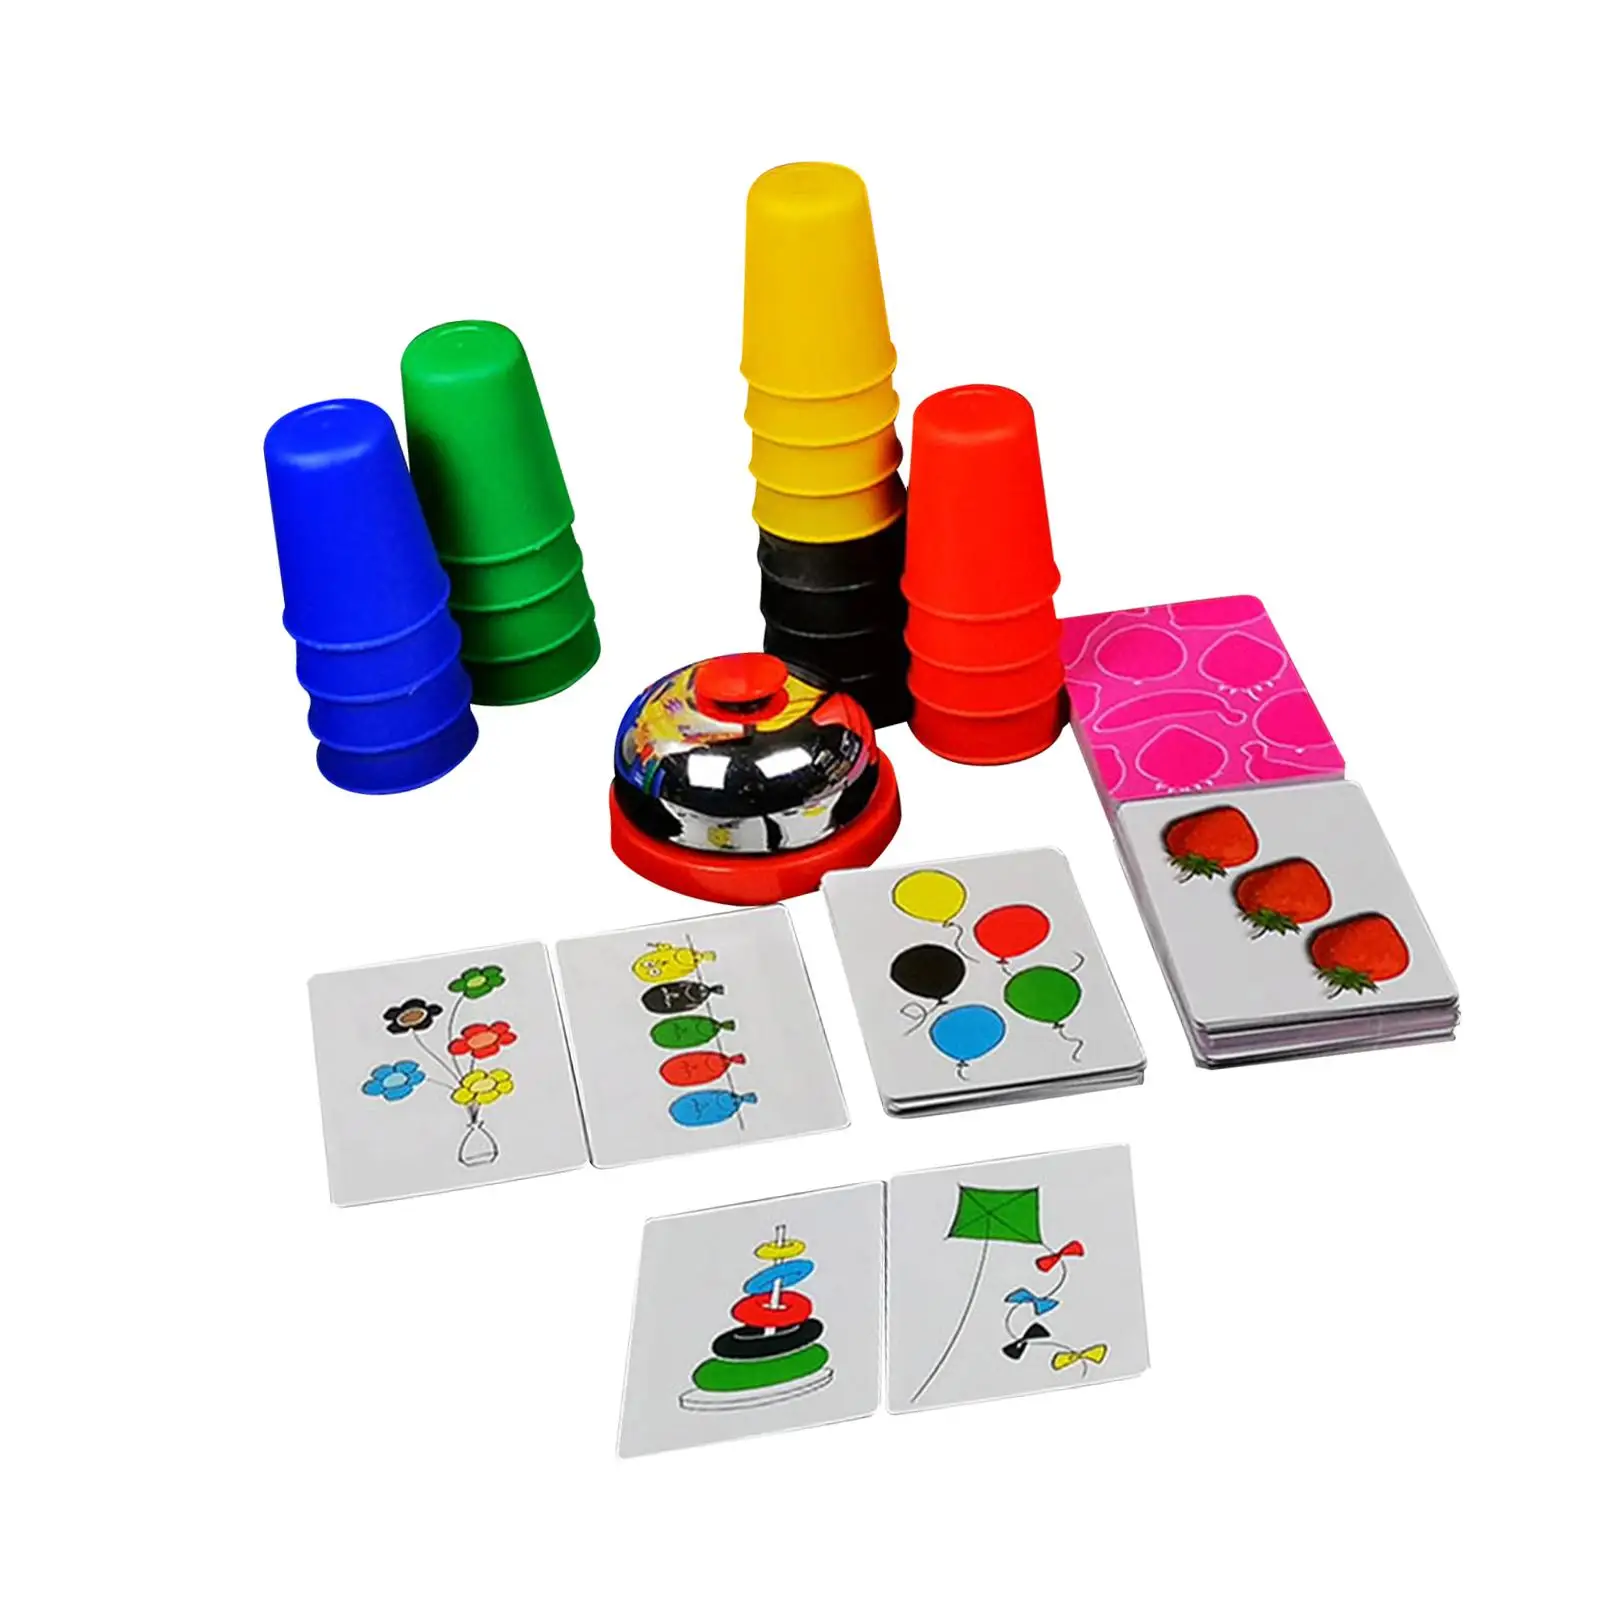 Speed Stacking Cups Set with Picture Cards Funny Quick Cup Games Stacking Cups Games for Adults Boys Girls Children Teens